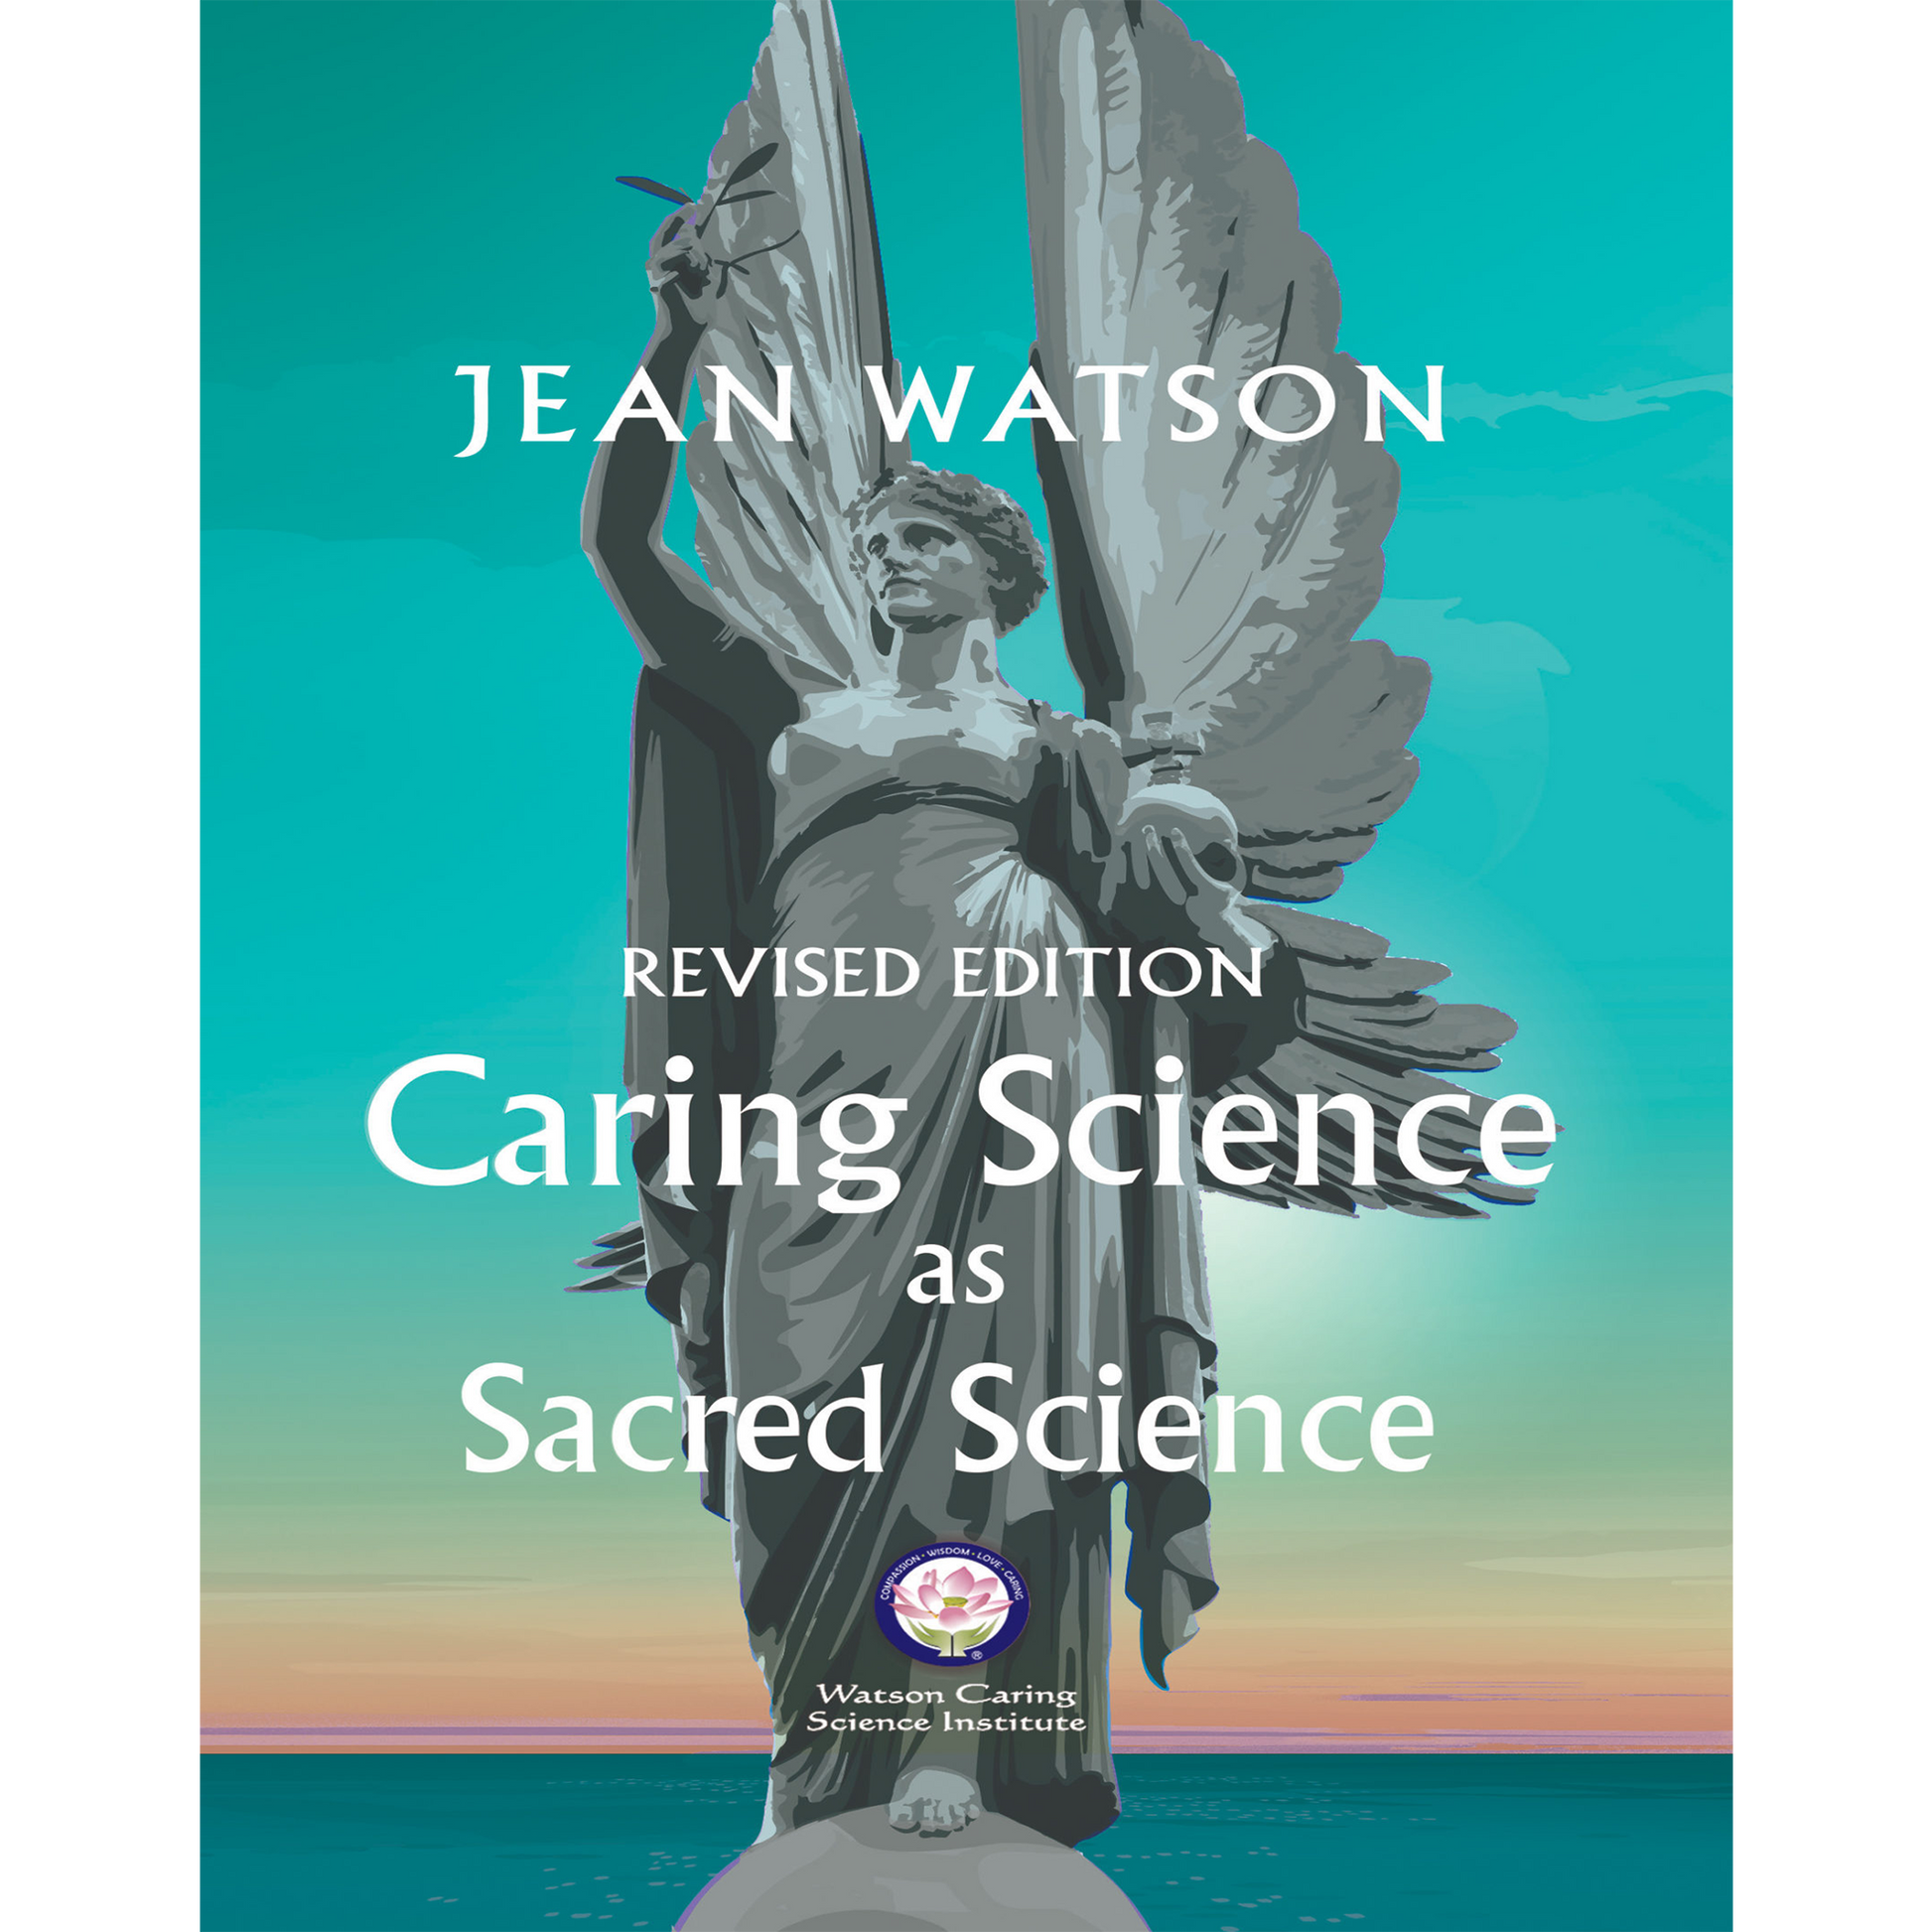 By examining the convergence of personal and professional efforts, the author offers a fresh perspective on caring and sacred science, highlighting the value of authentic, ethical living and the pursuit of knowledge.